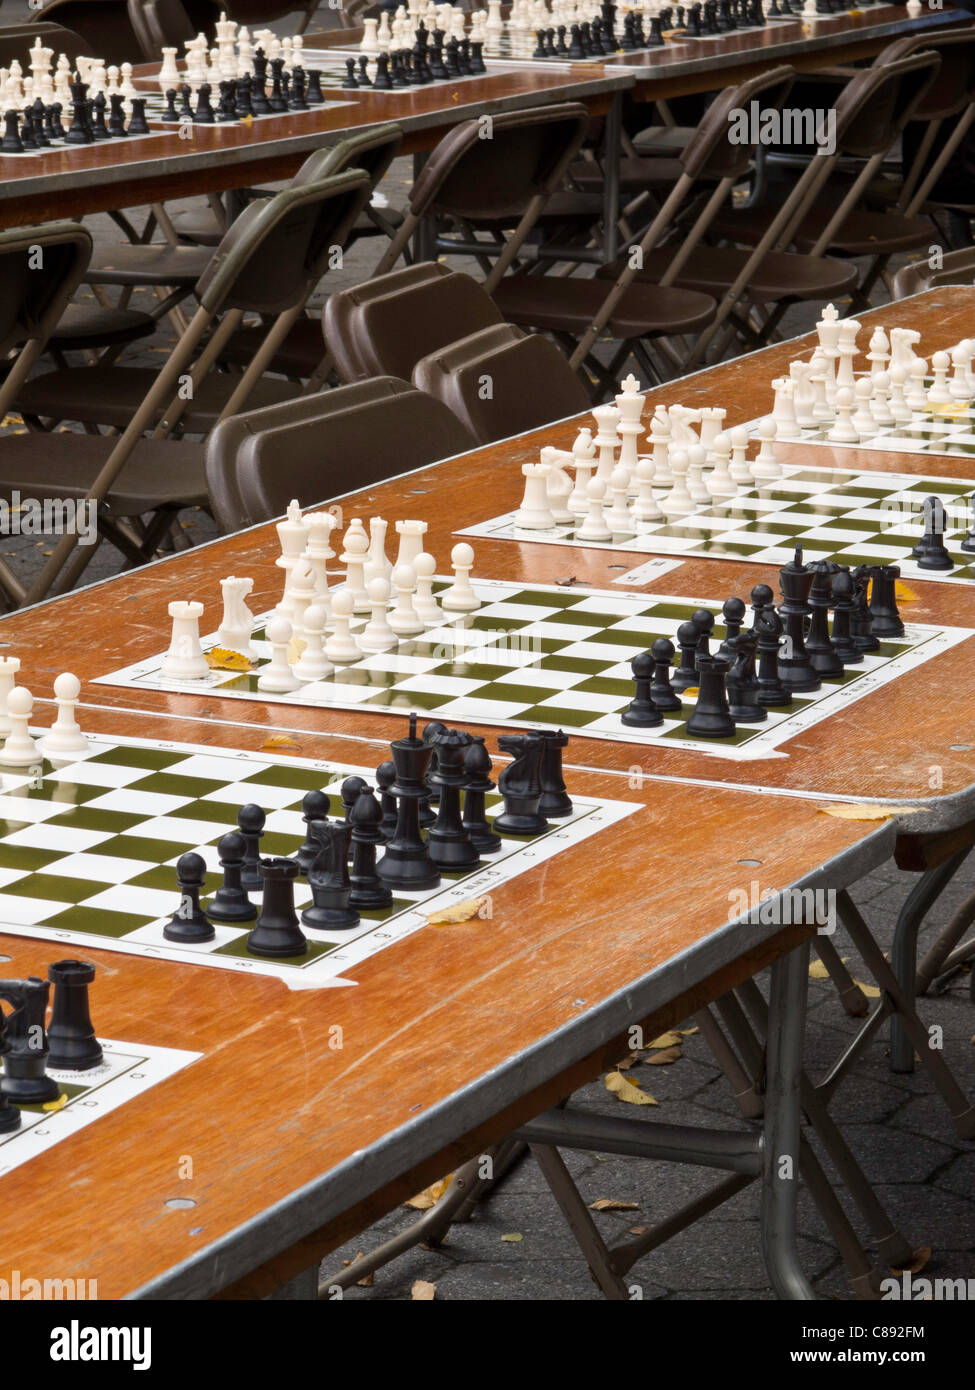 Chess Players during Playing at Local Tournament Editorial Stock Photo -  Image of aged, horse: 112934768